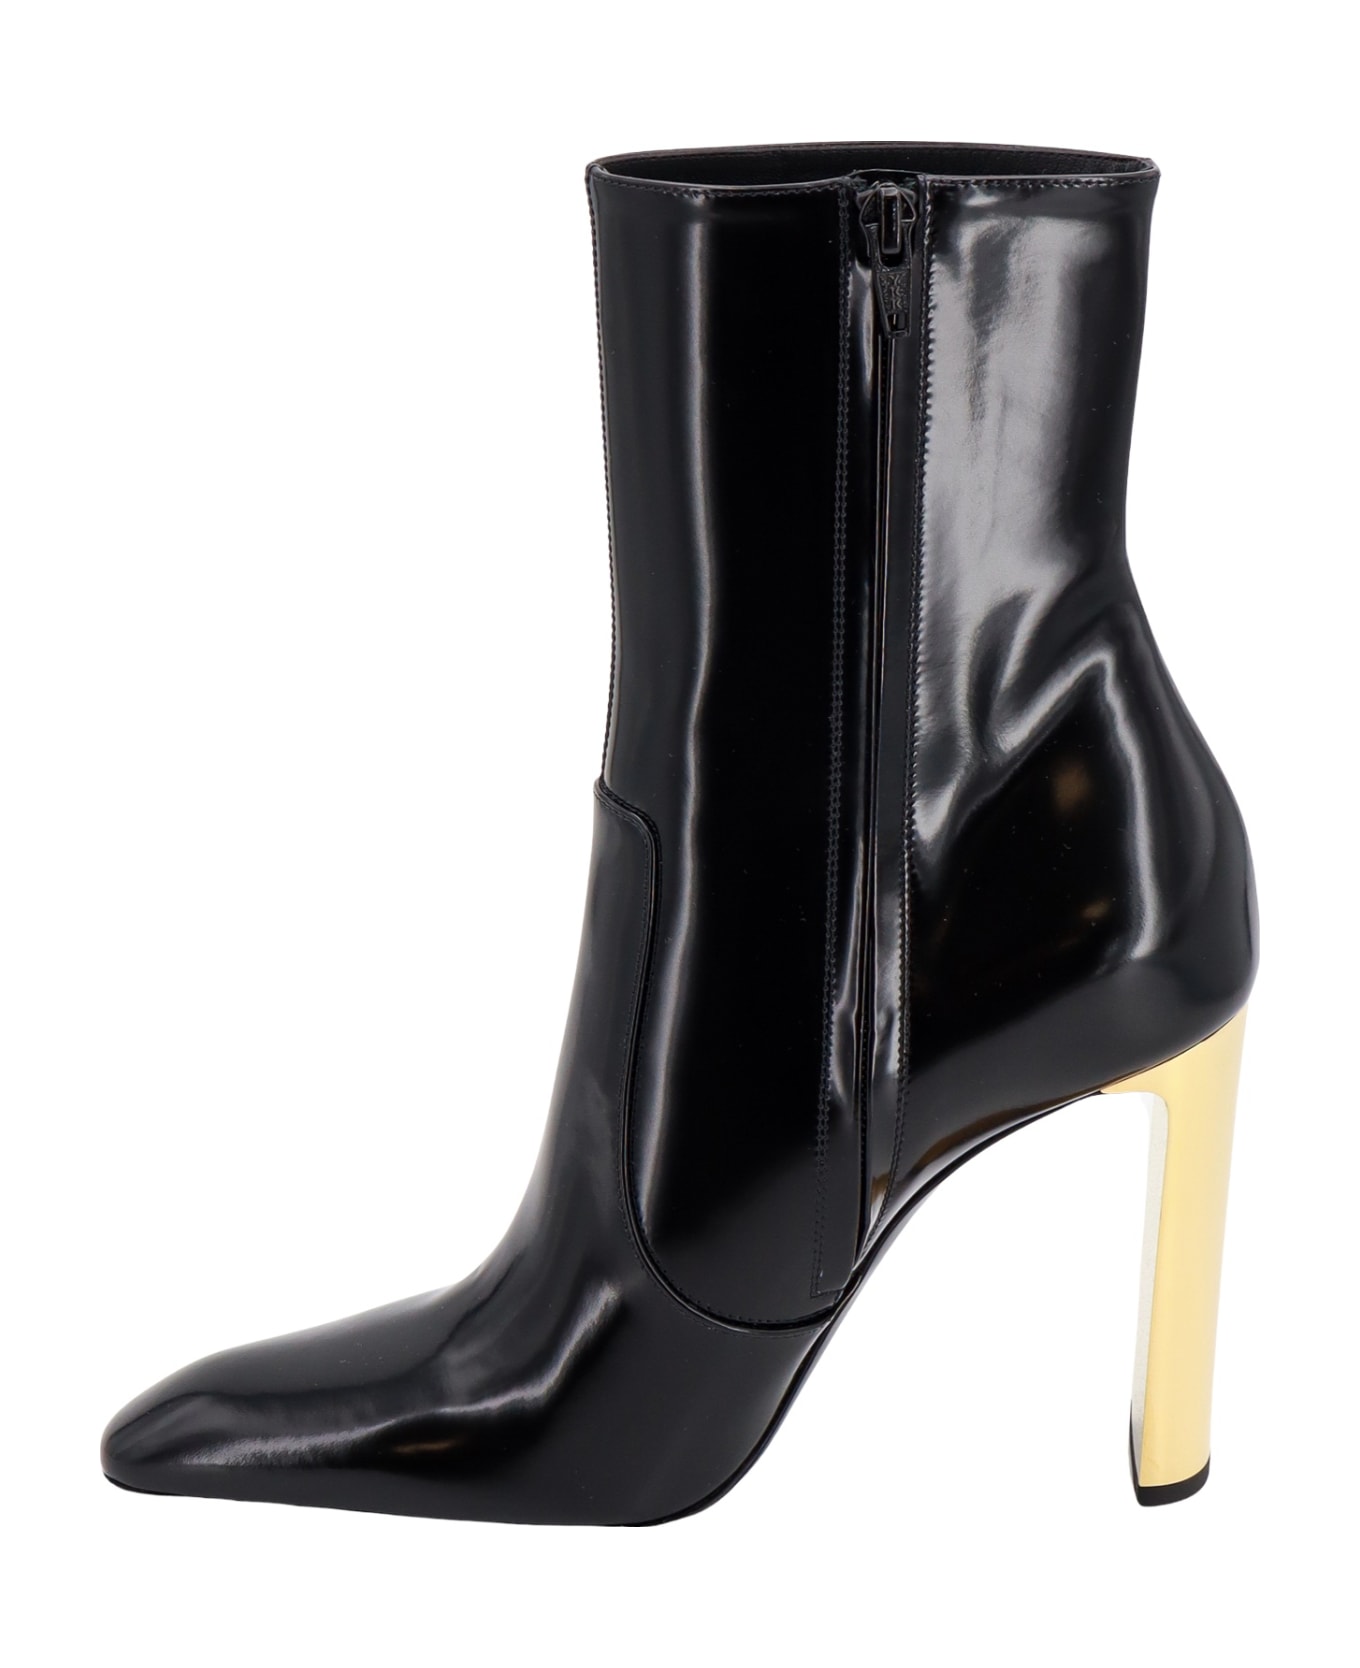 Saint Laurent Ankle Boot In Glazed Leather And Gold Heel - Black ブーツ